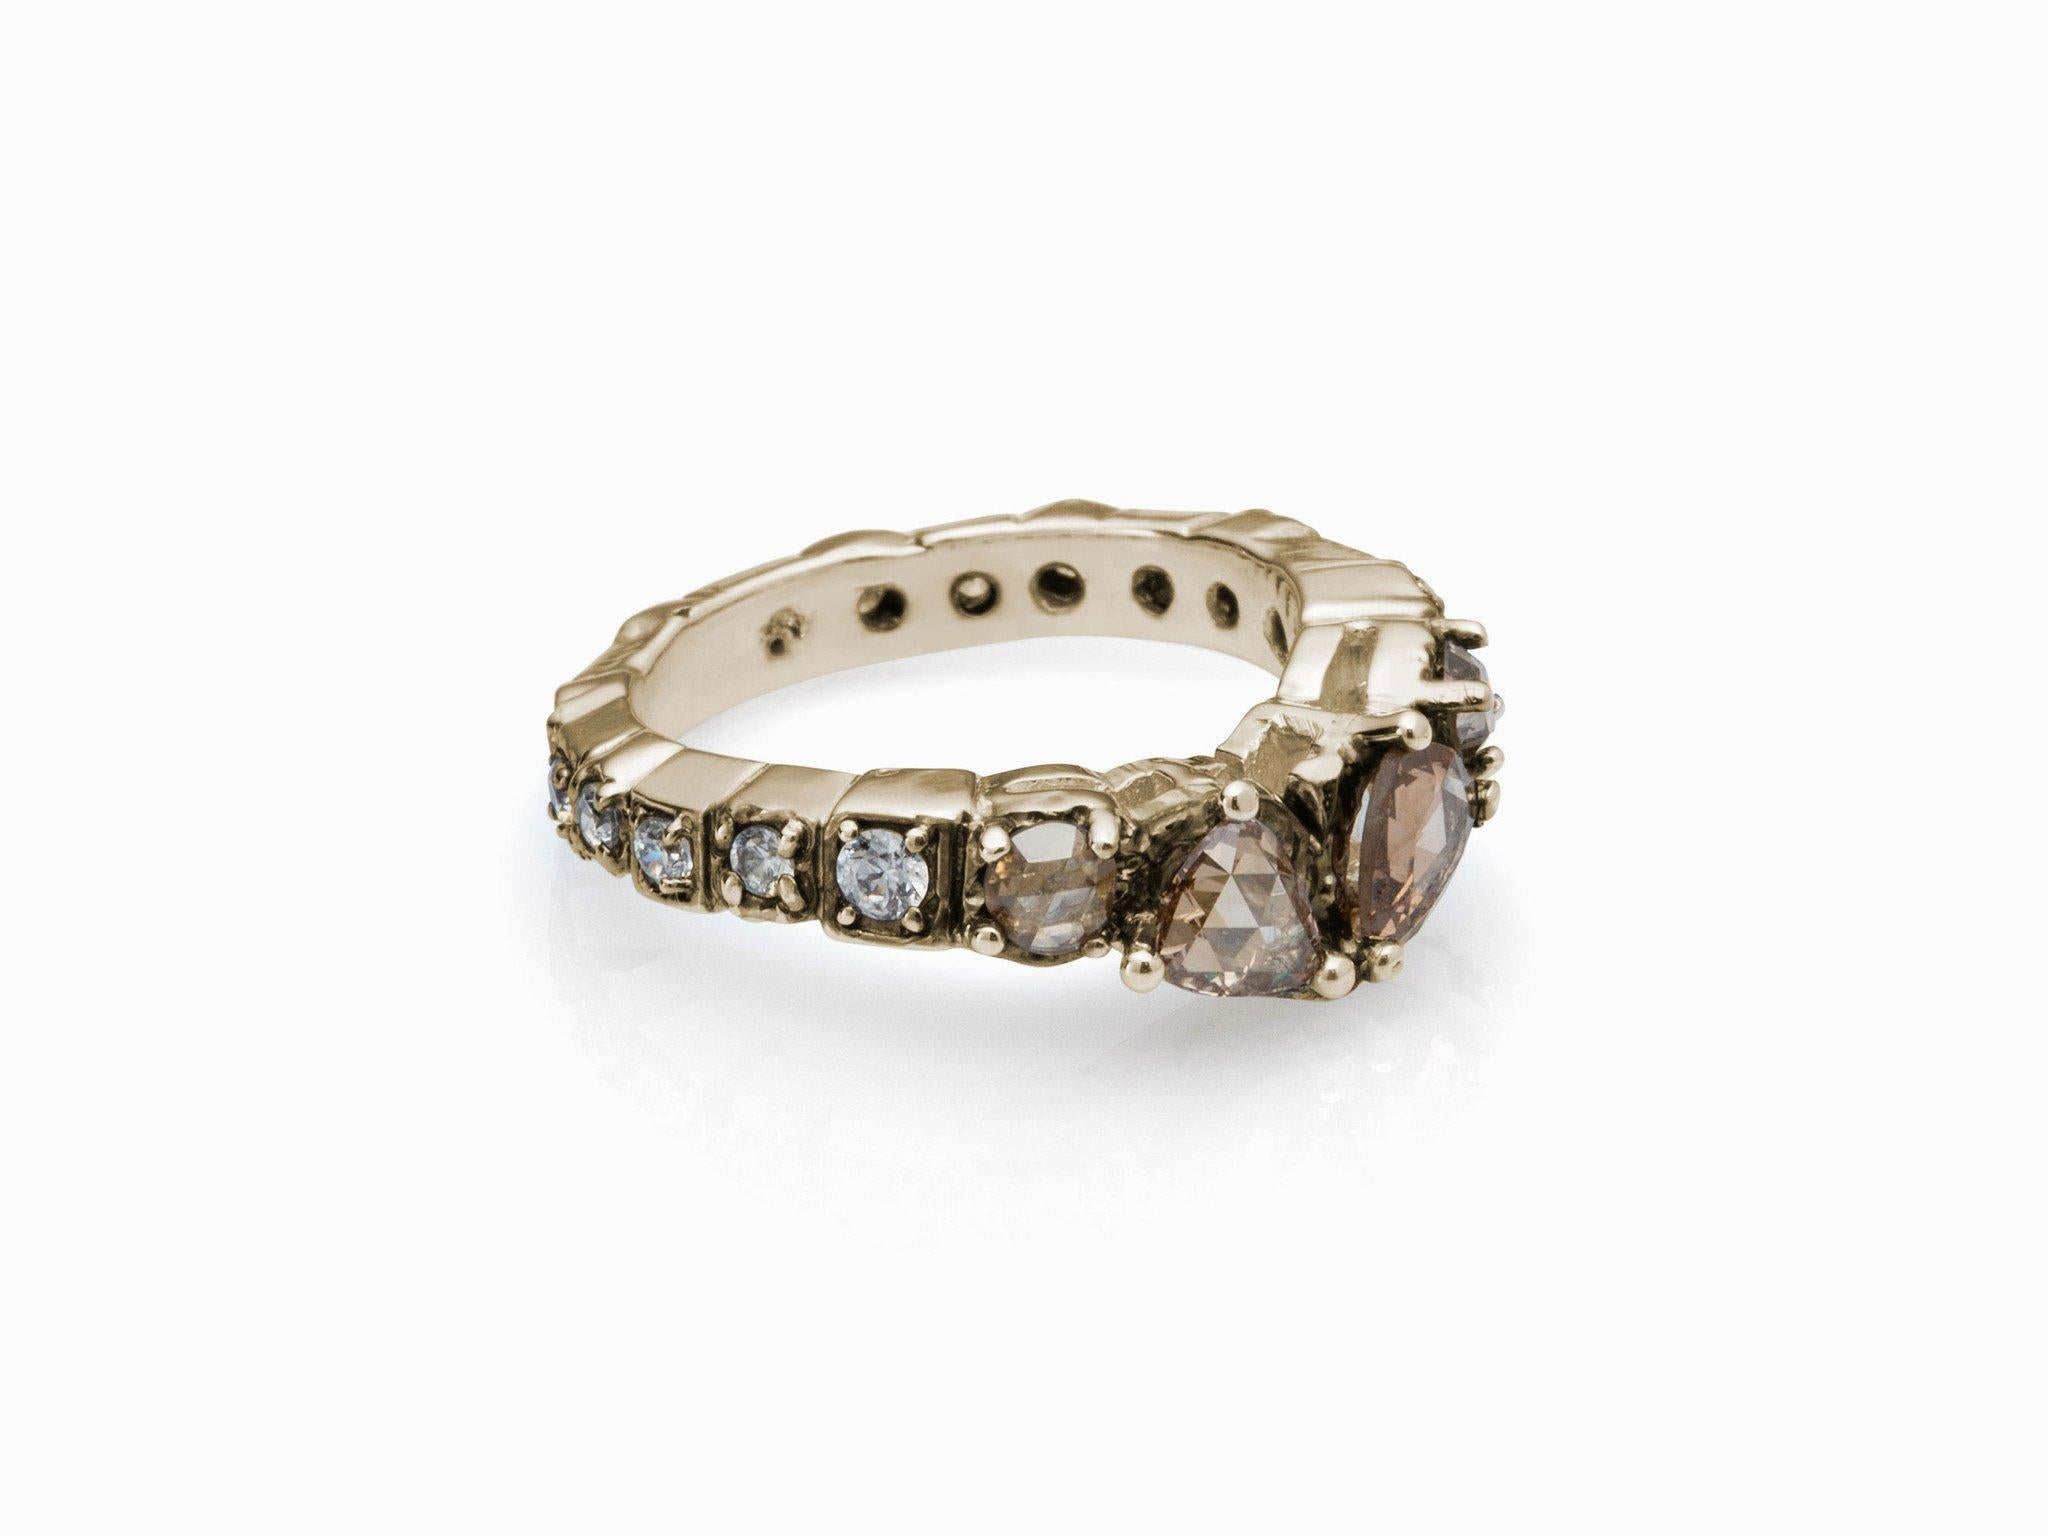 MANIAMANIA Sacred band in 14k Yellow gold with two 5x4mm rose cut pear-shaped Champagne rose cut Diamonds (0.4-0.5ctw), two 3mm round rose cut Champagne Diamond shoulders (0.24ct), and eternity band of diamond accents (0.4ctw) in ring size